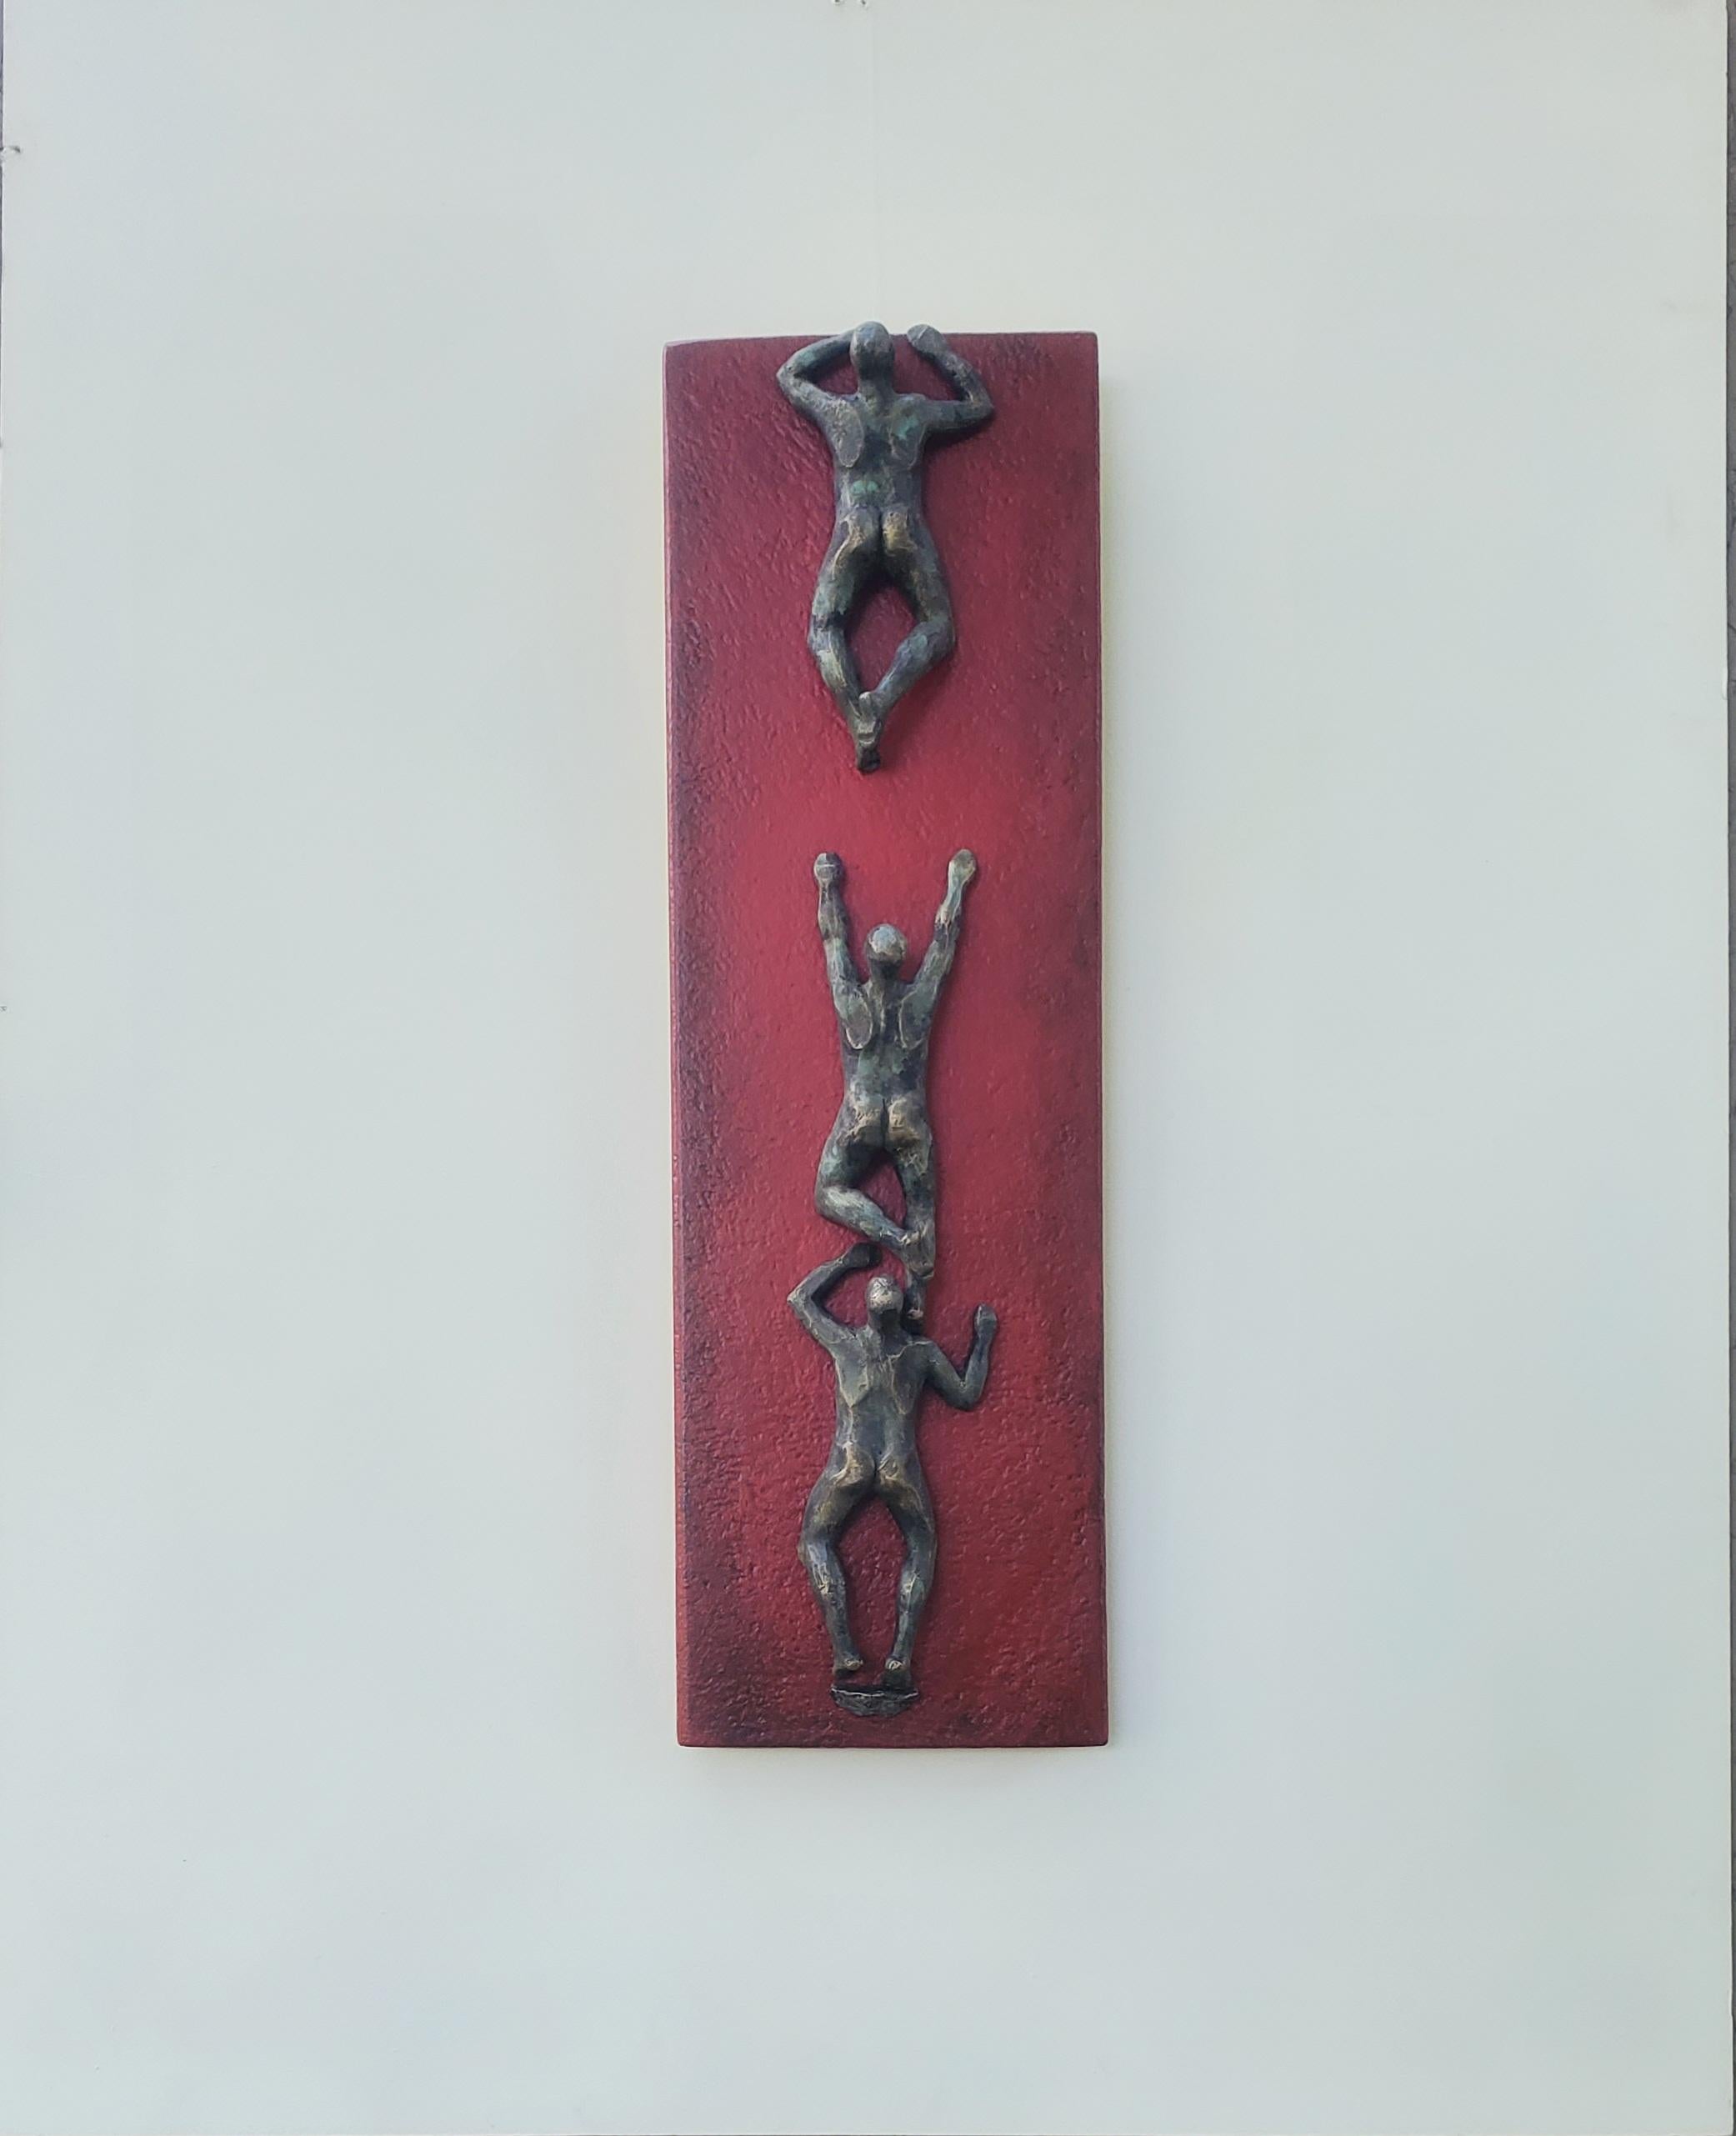 <p>Artist Comments<br>Artist Yelitza Diaz combines figurative art and geometric elements with three nude figures climbing a vertical red panel. Rooted in the idea of conquering obstacles and breaking through barriers, the work symbolizes the pursuit